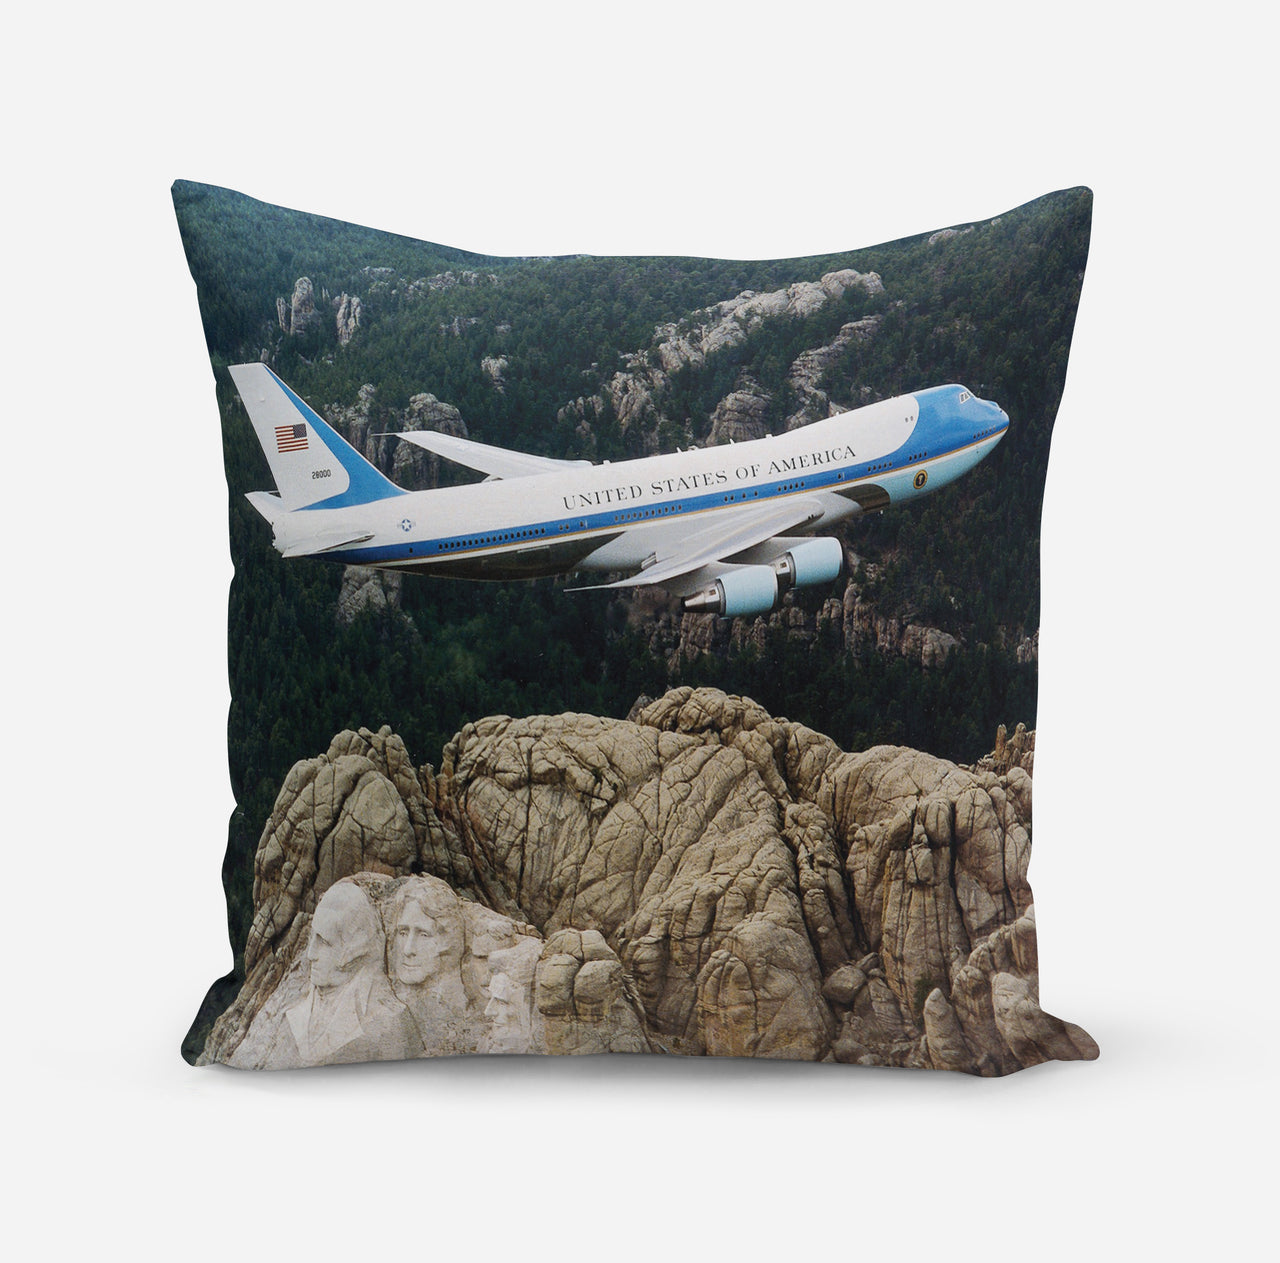 Cruising United States of America Boeing 747 Printed Pillows Designed Pillows